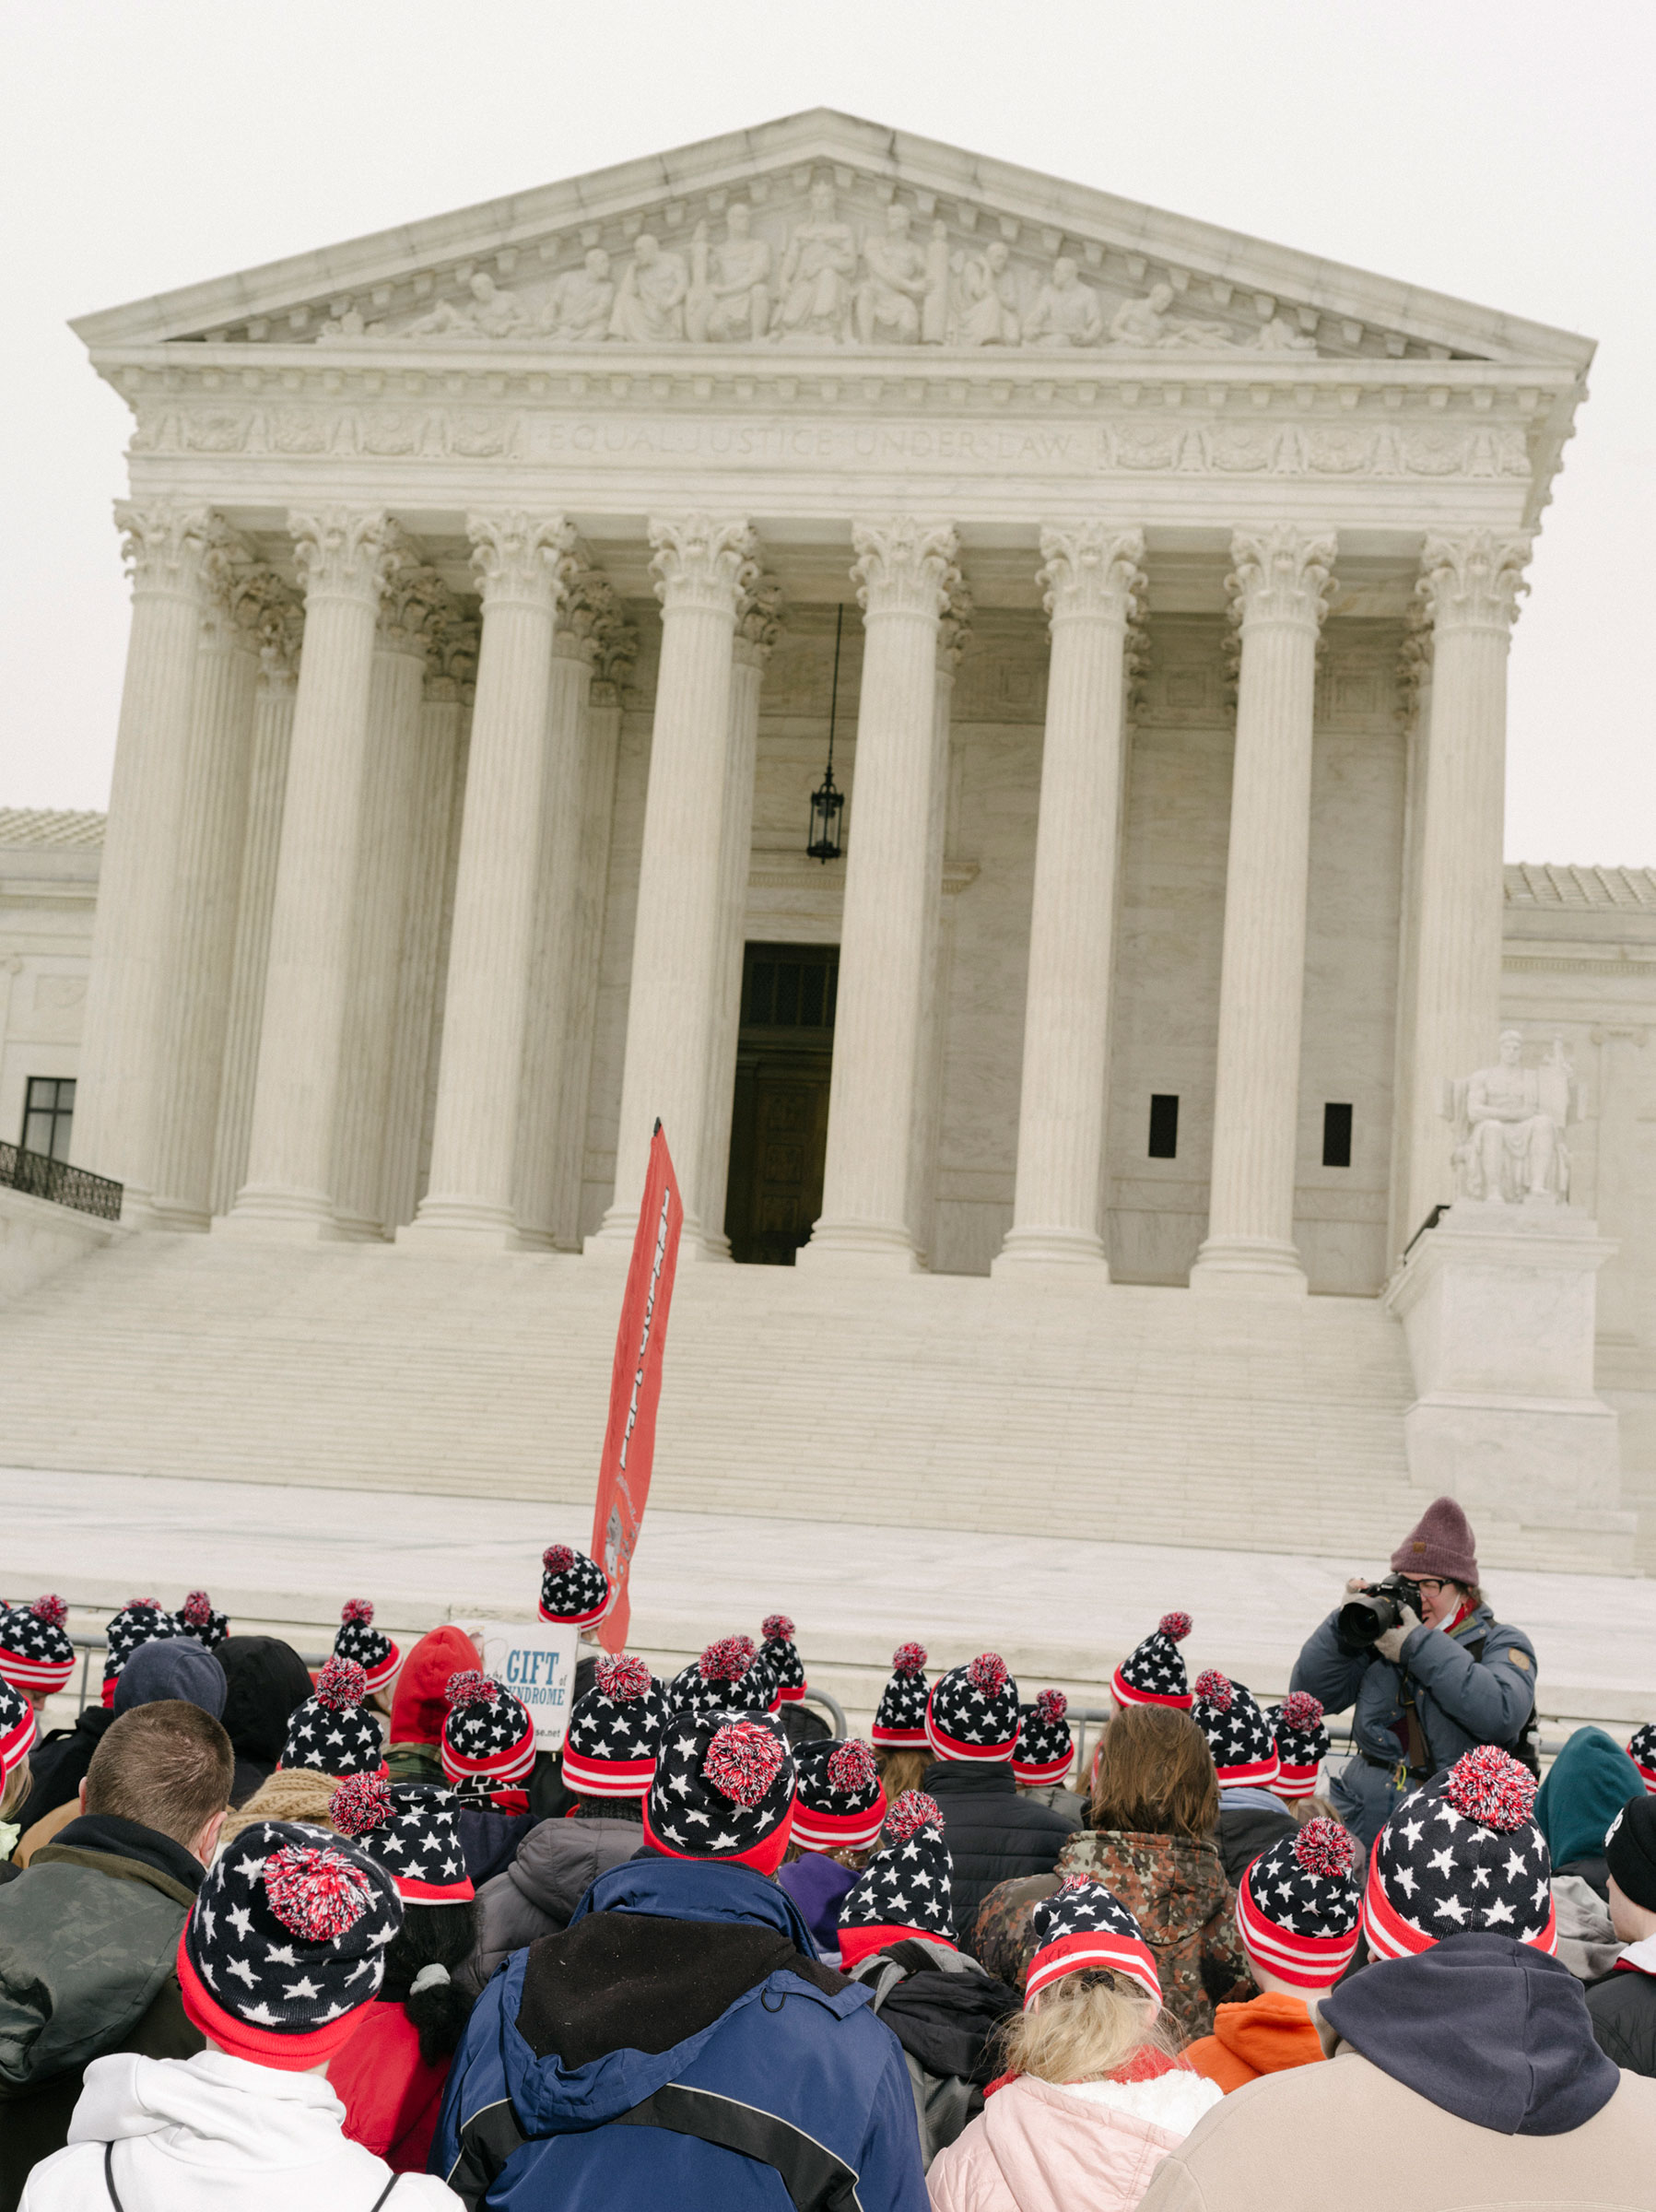 March for Life attendees in front of the Supreme Court on Jan. 21. (M. Levy for TIME)